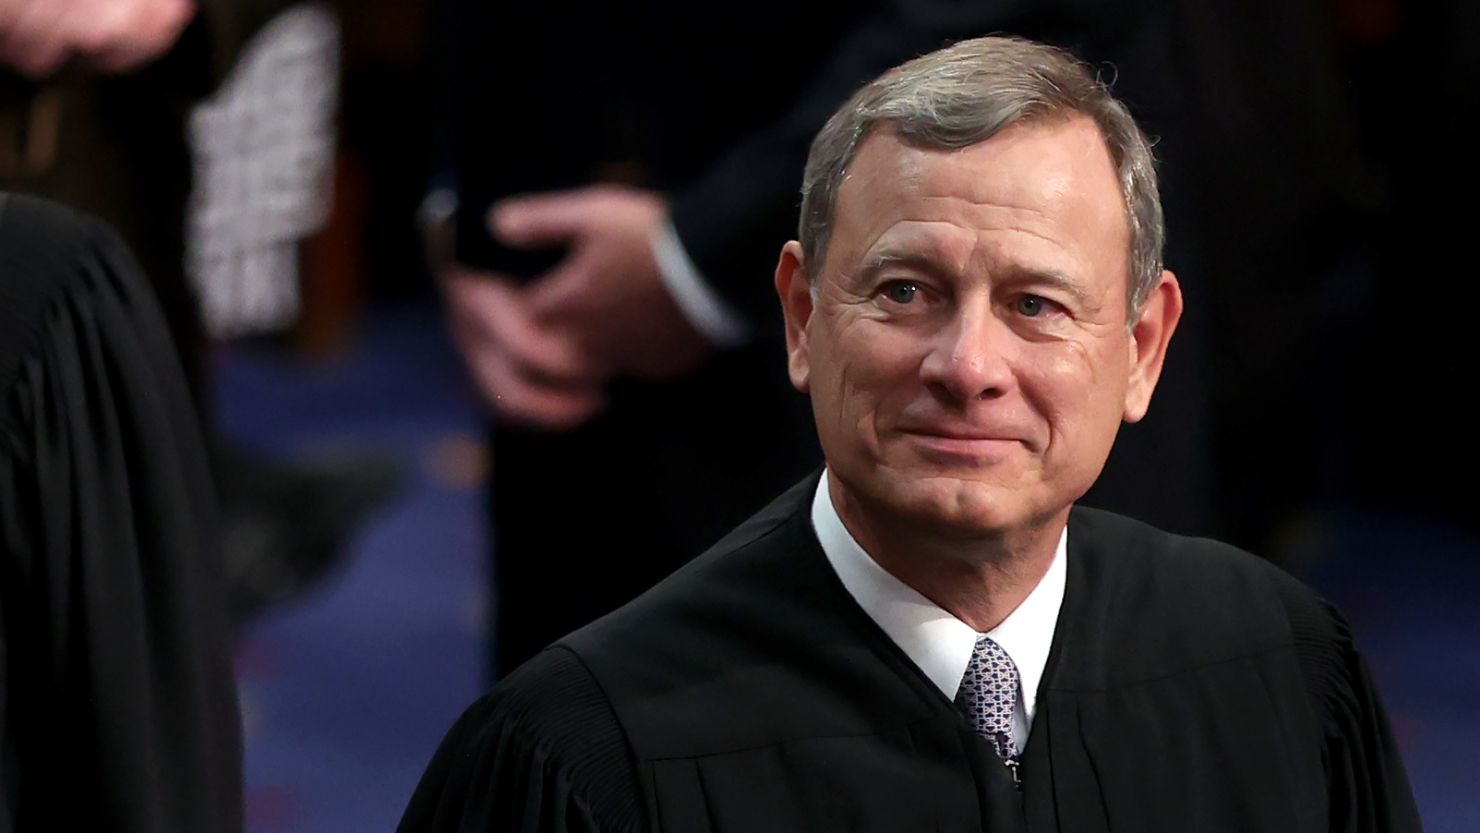 Supreme Court Chief Justice John Roberts is seen prior to President Joe Biden giving his State of the Union address on March 1, 2022.